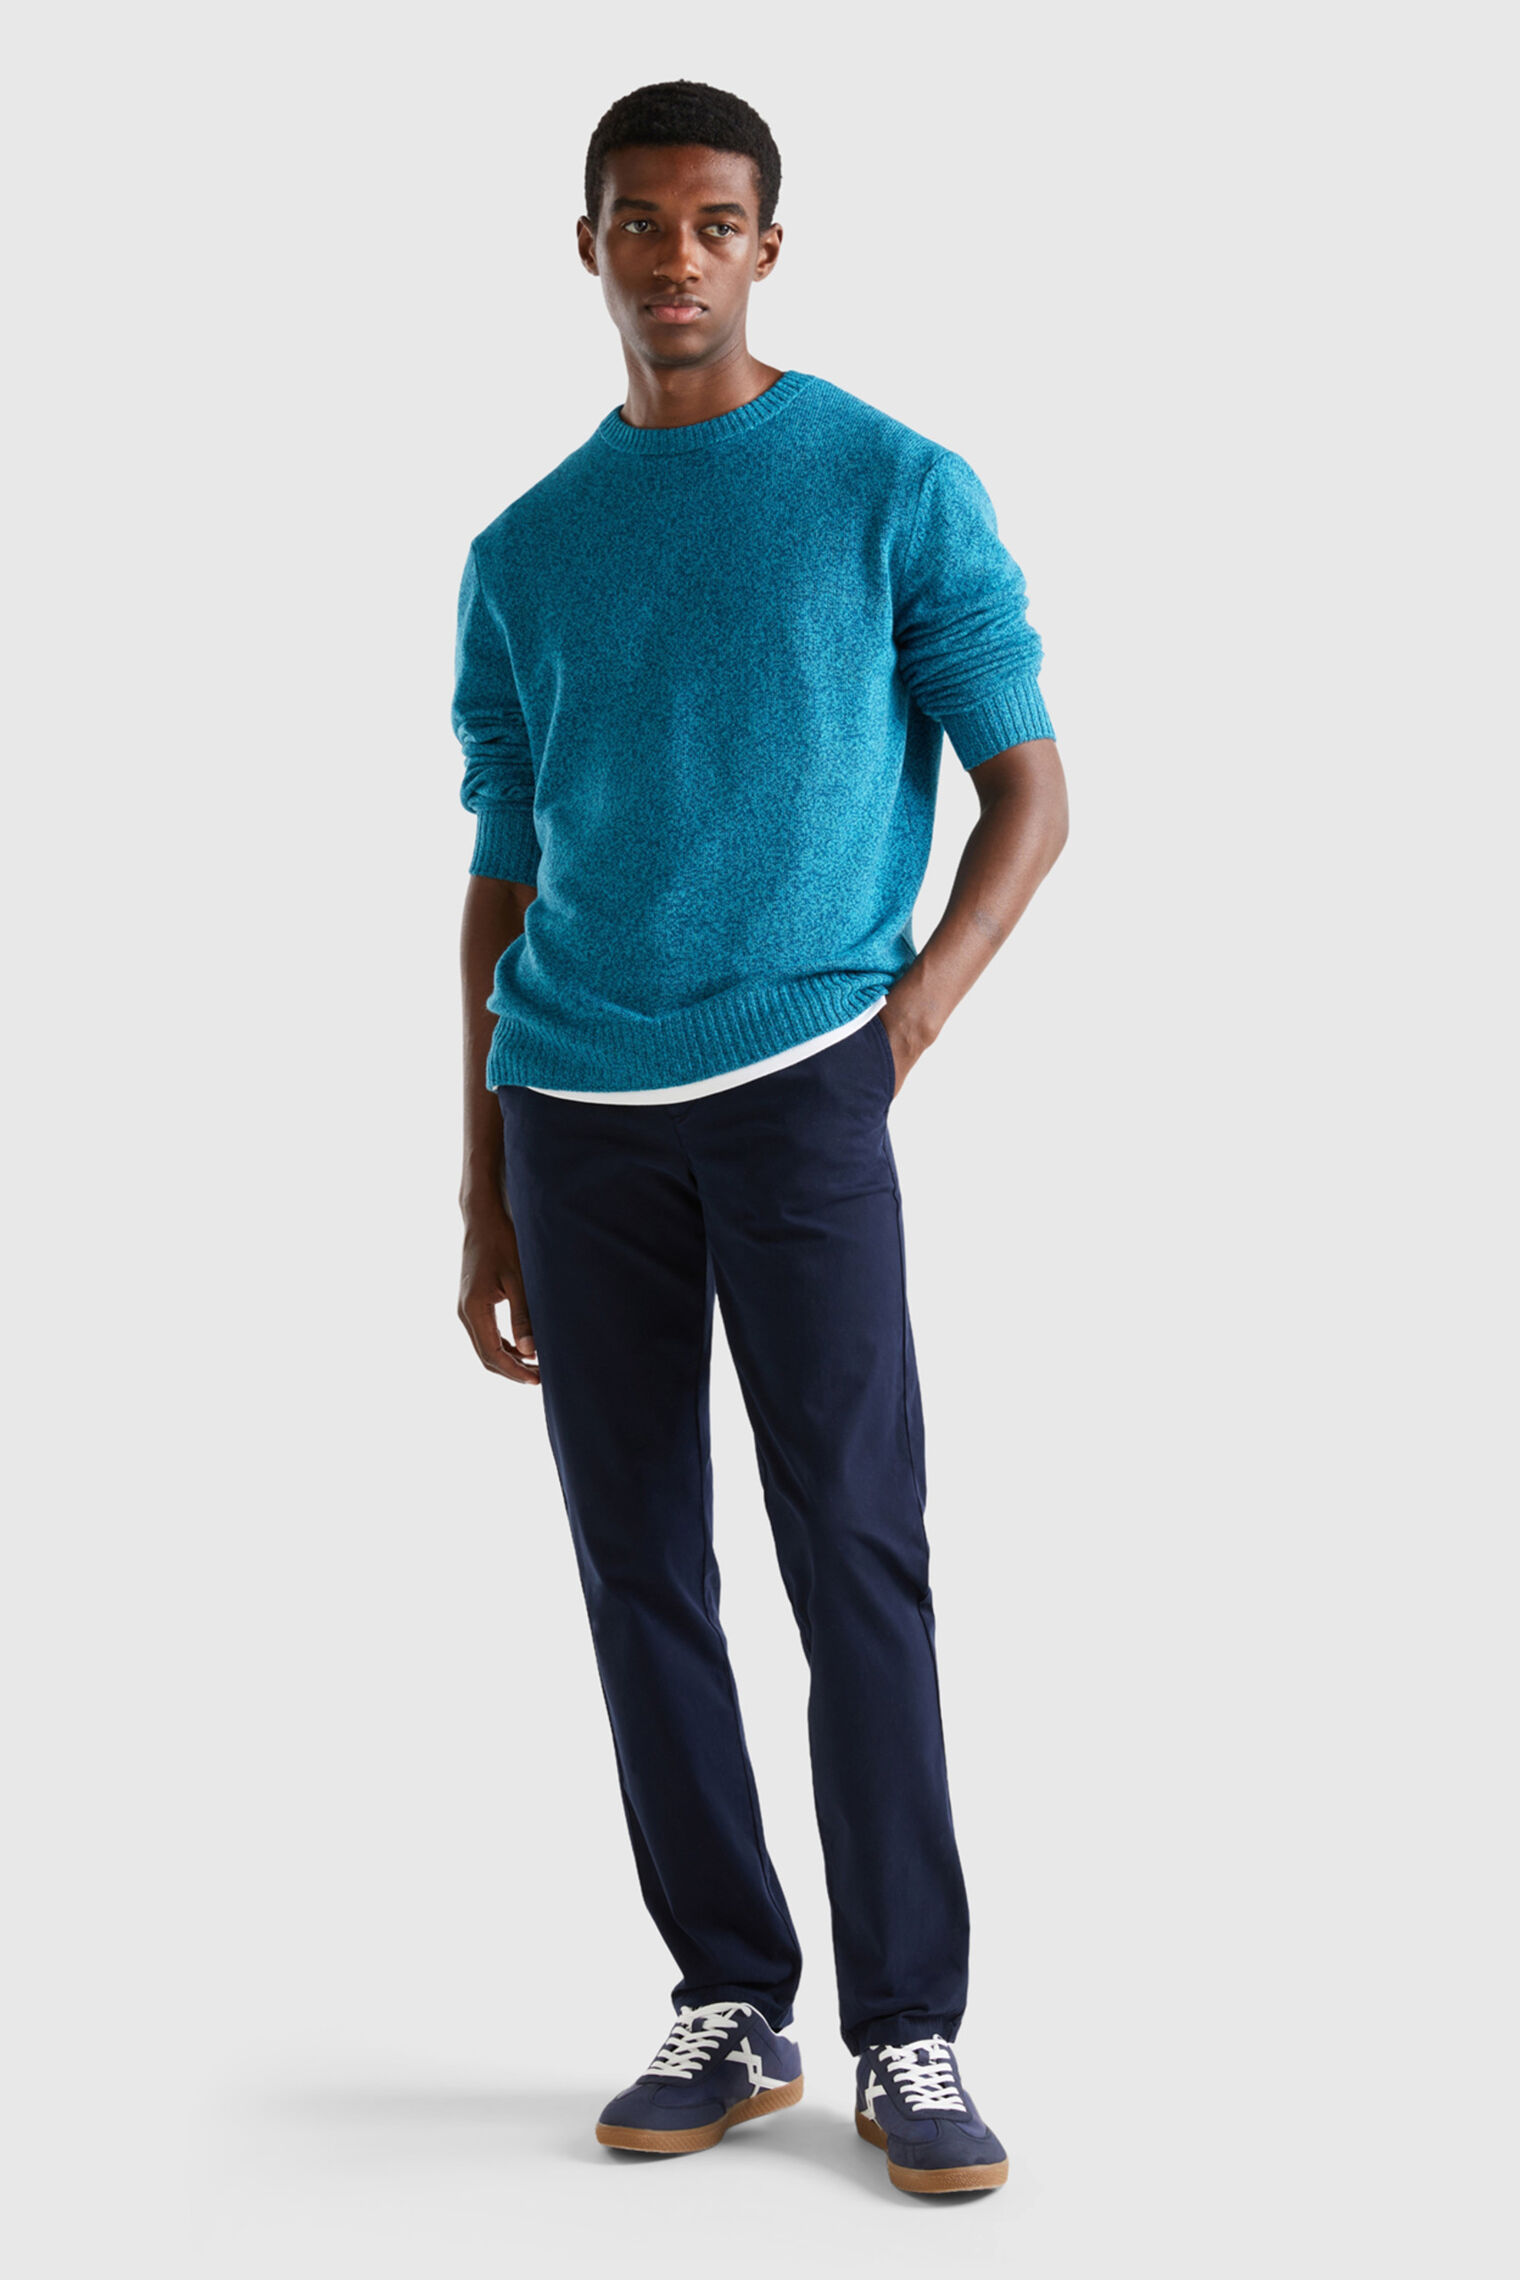 Men's Knitwear and Jumpers New Collection 2023 | Benetton